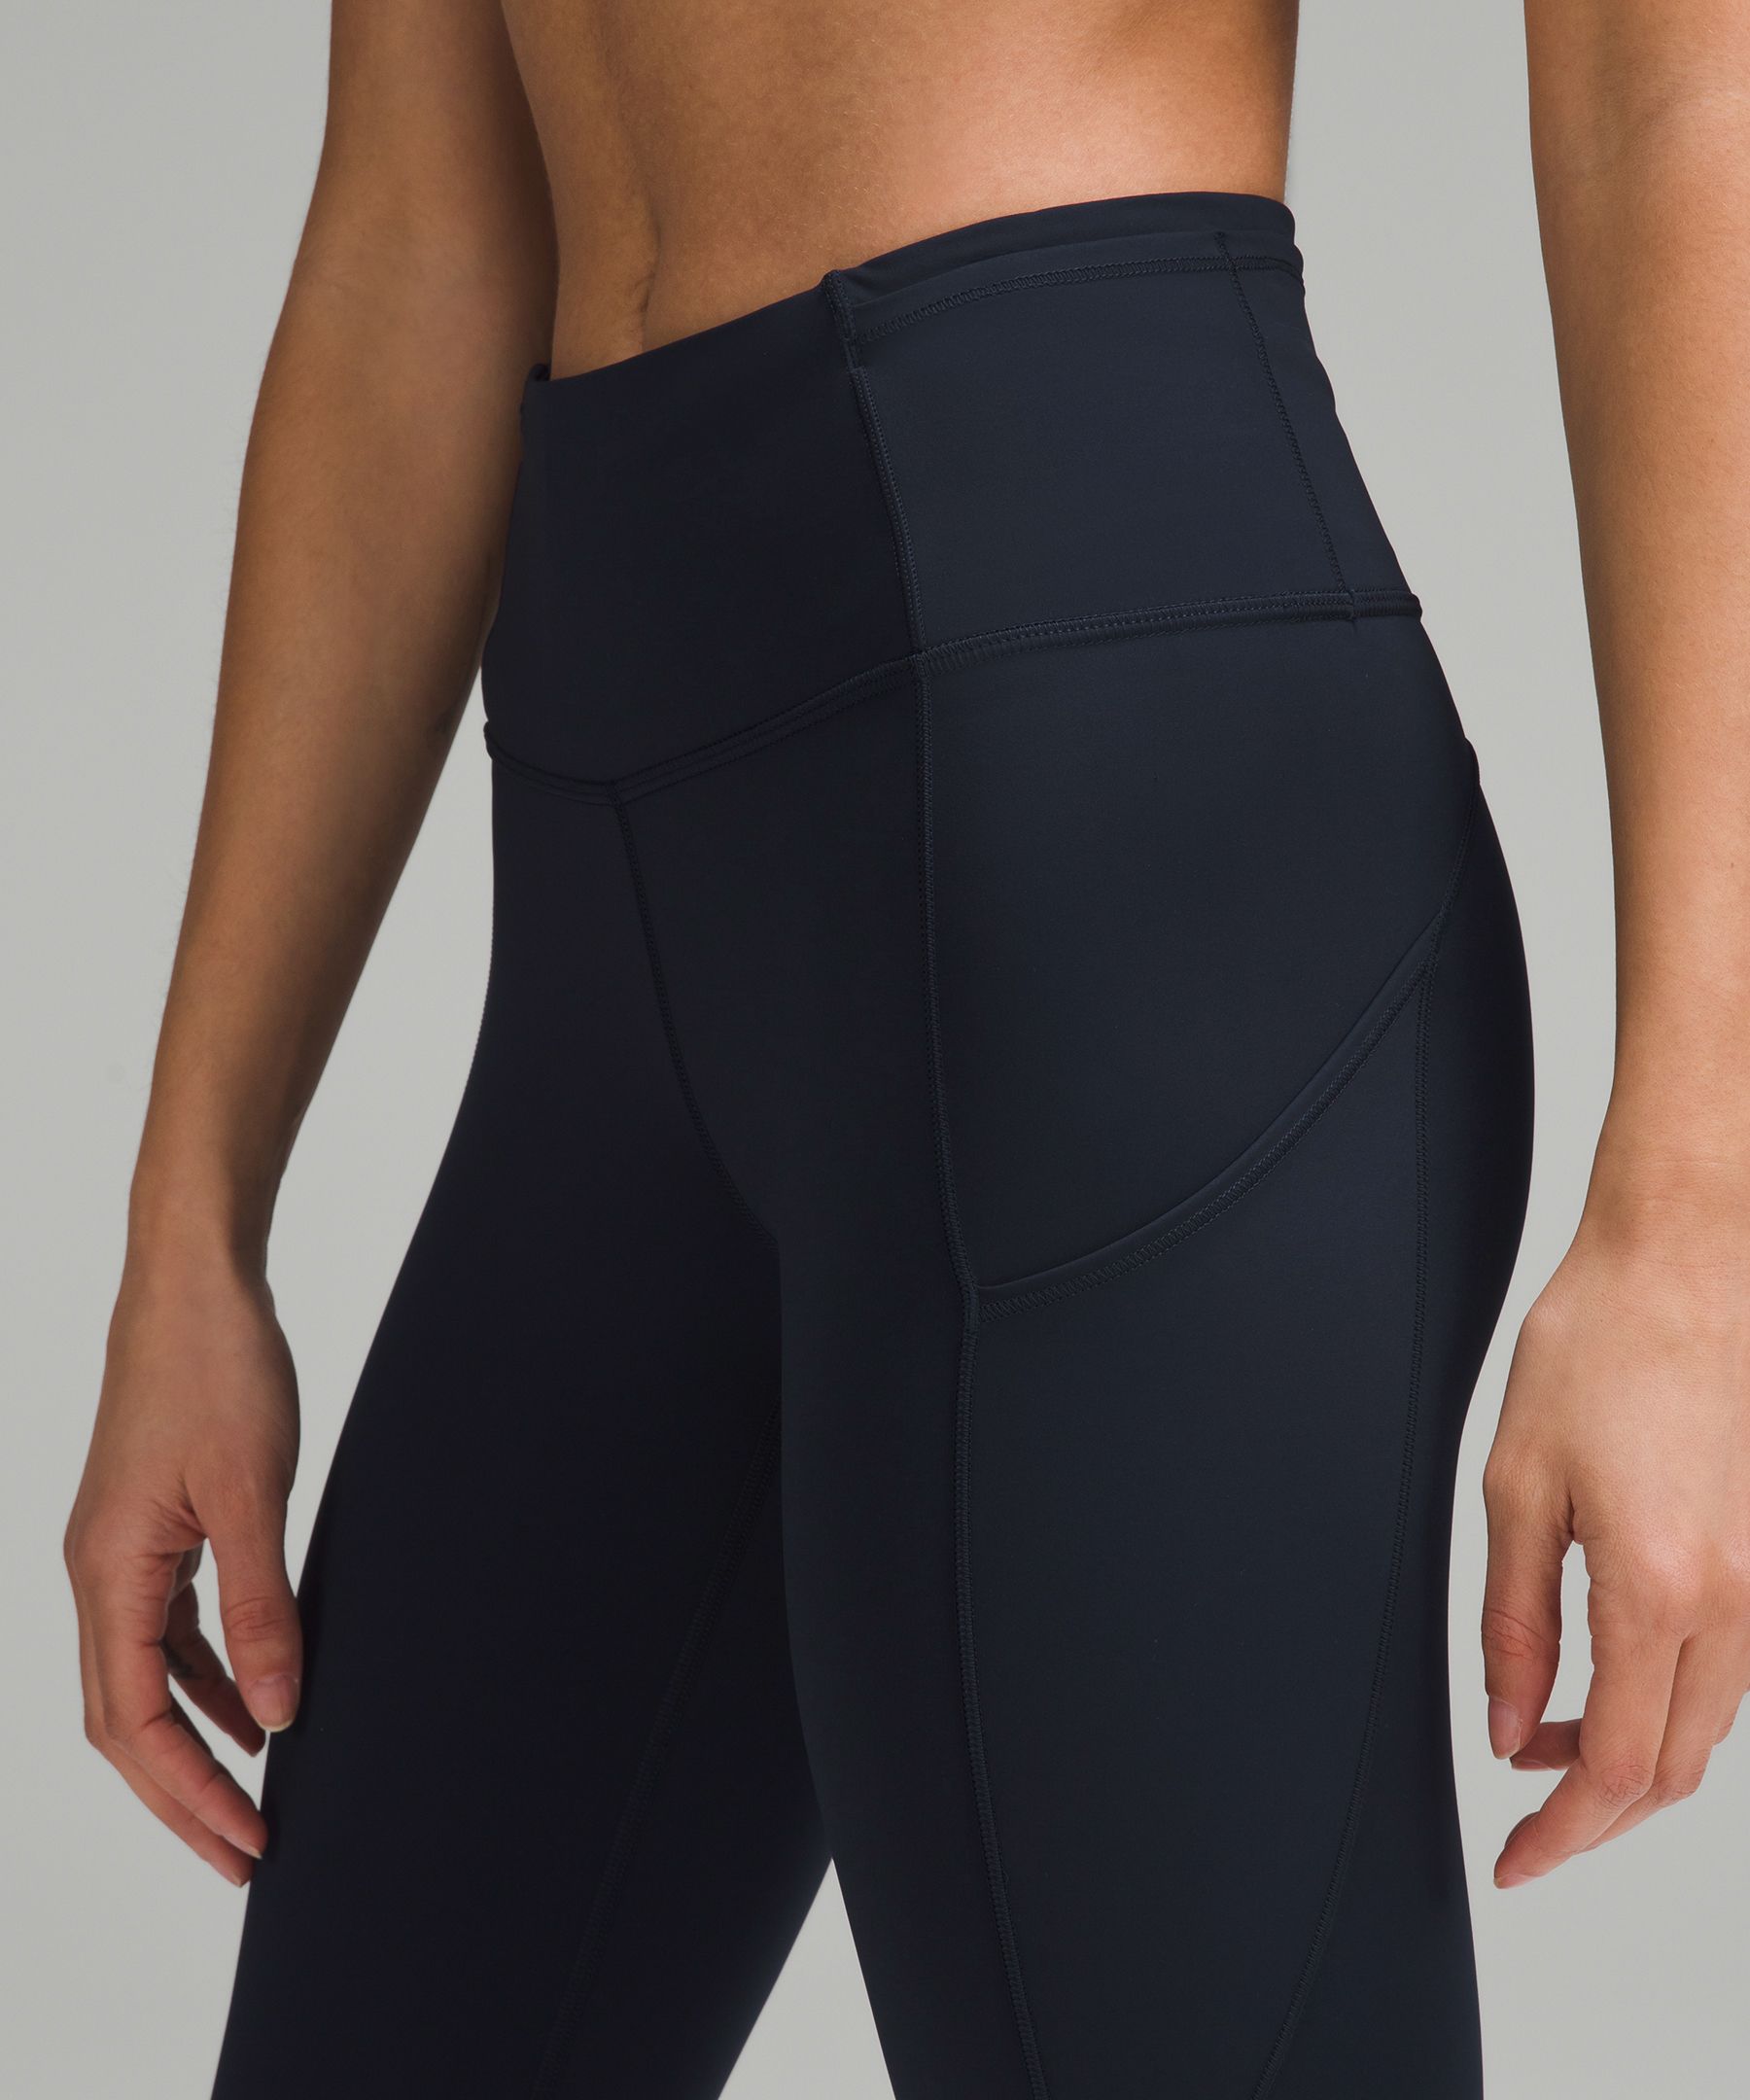 Lululemon Women's Fast Free High Rise Cropped 23/25 Tight